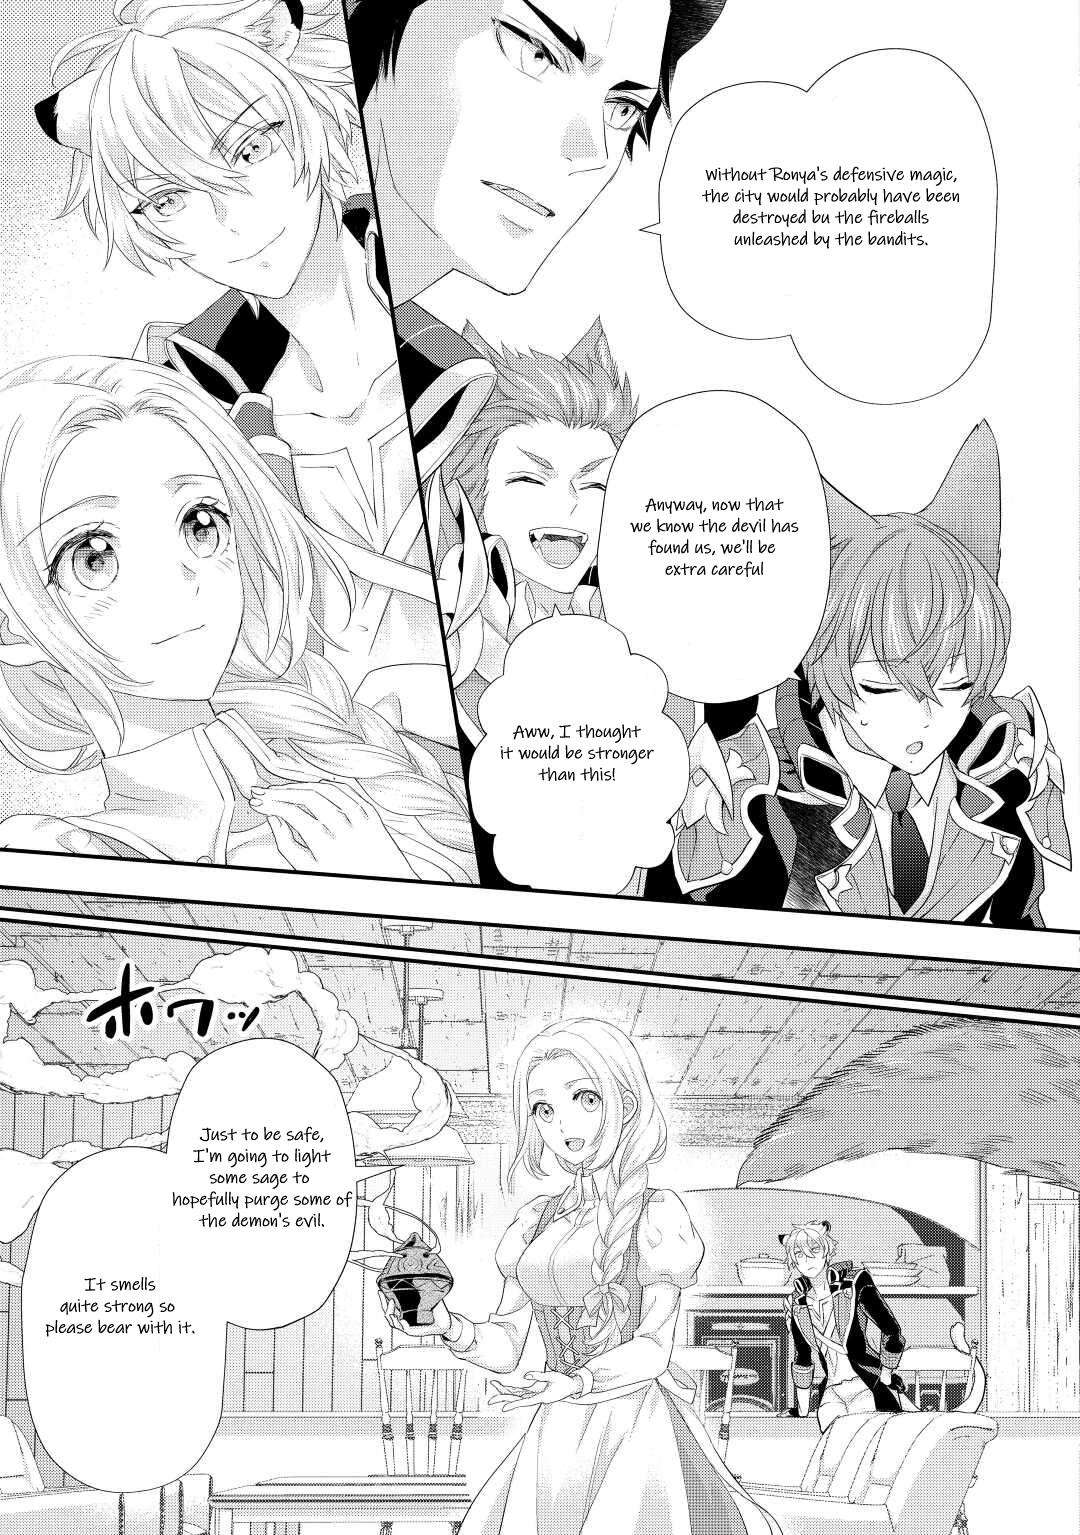 Milady Just Wants to Relax - chapter 34 - #3